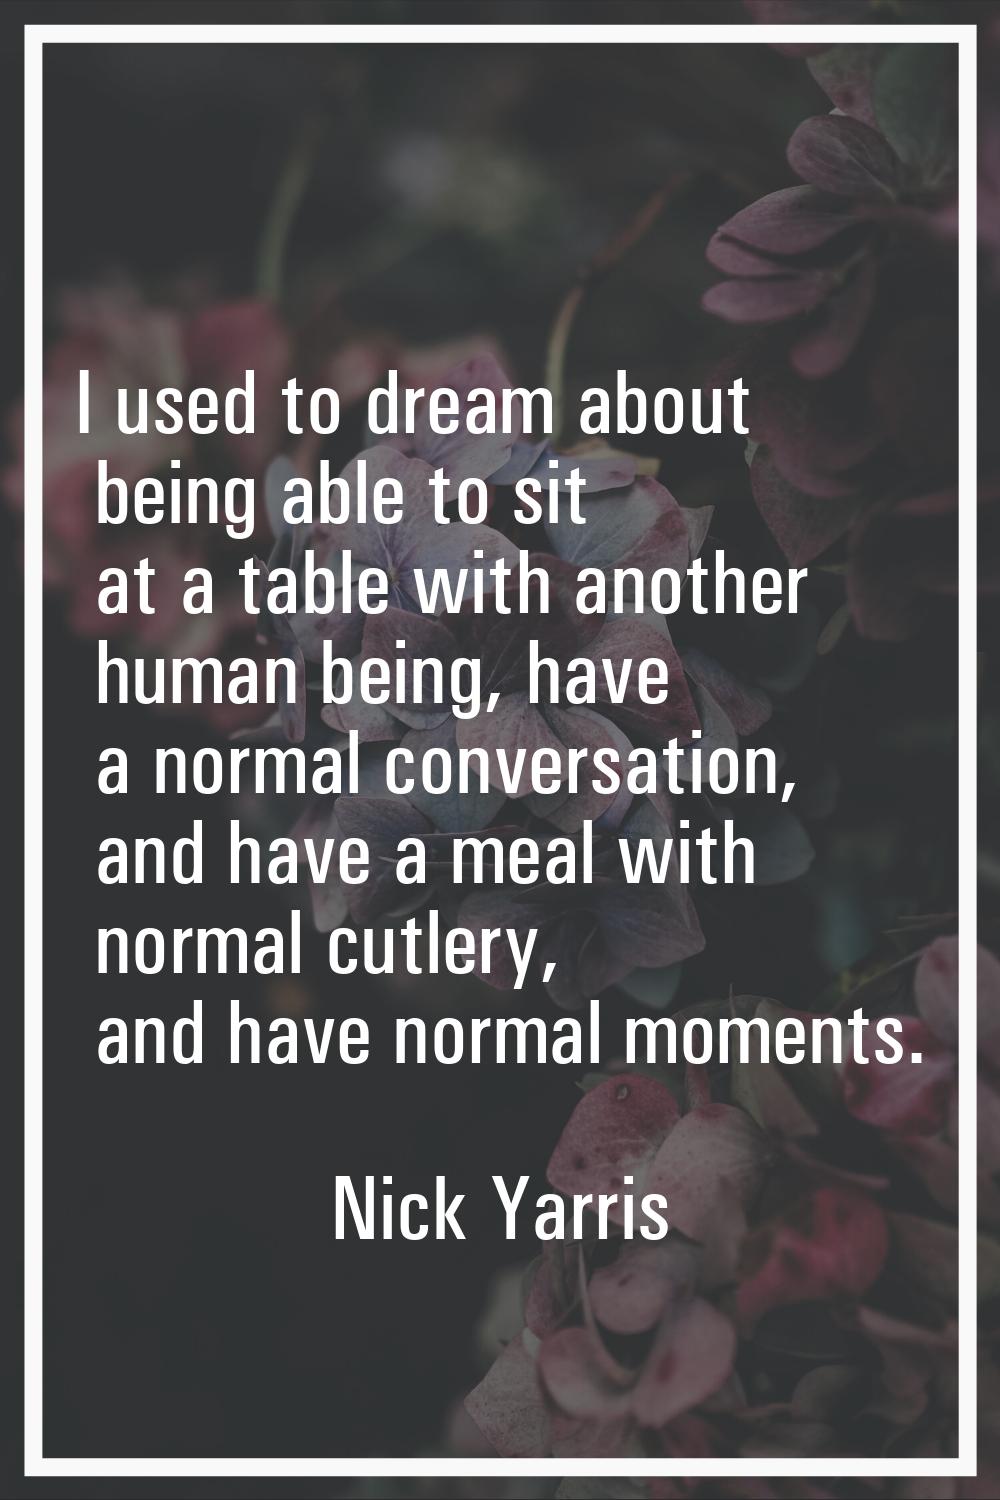 I used to dream about being able to sit at a table with another human being, have a normal conversa